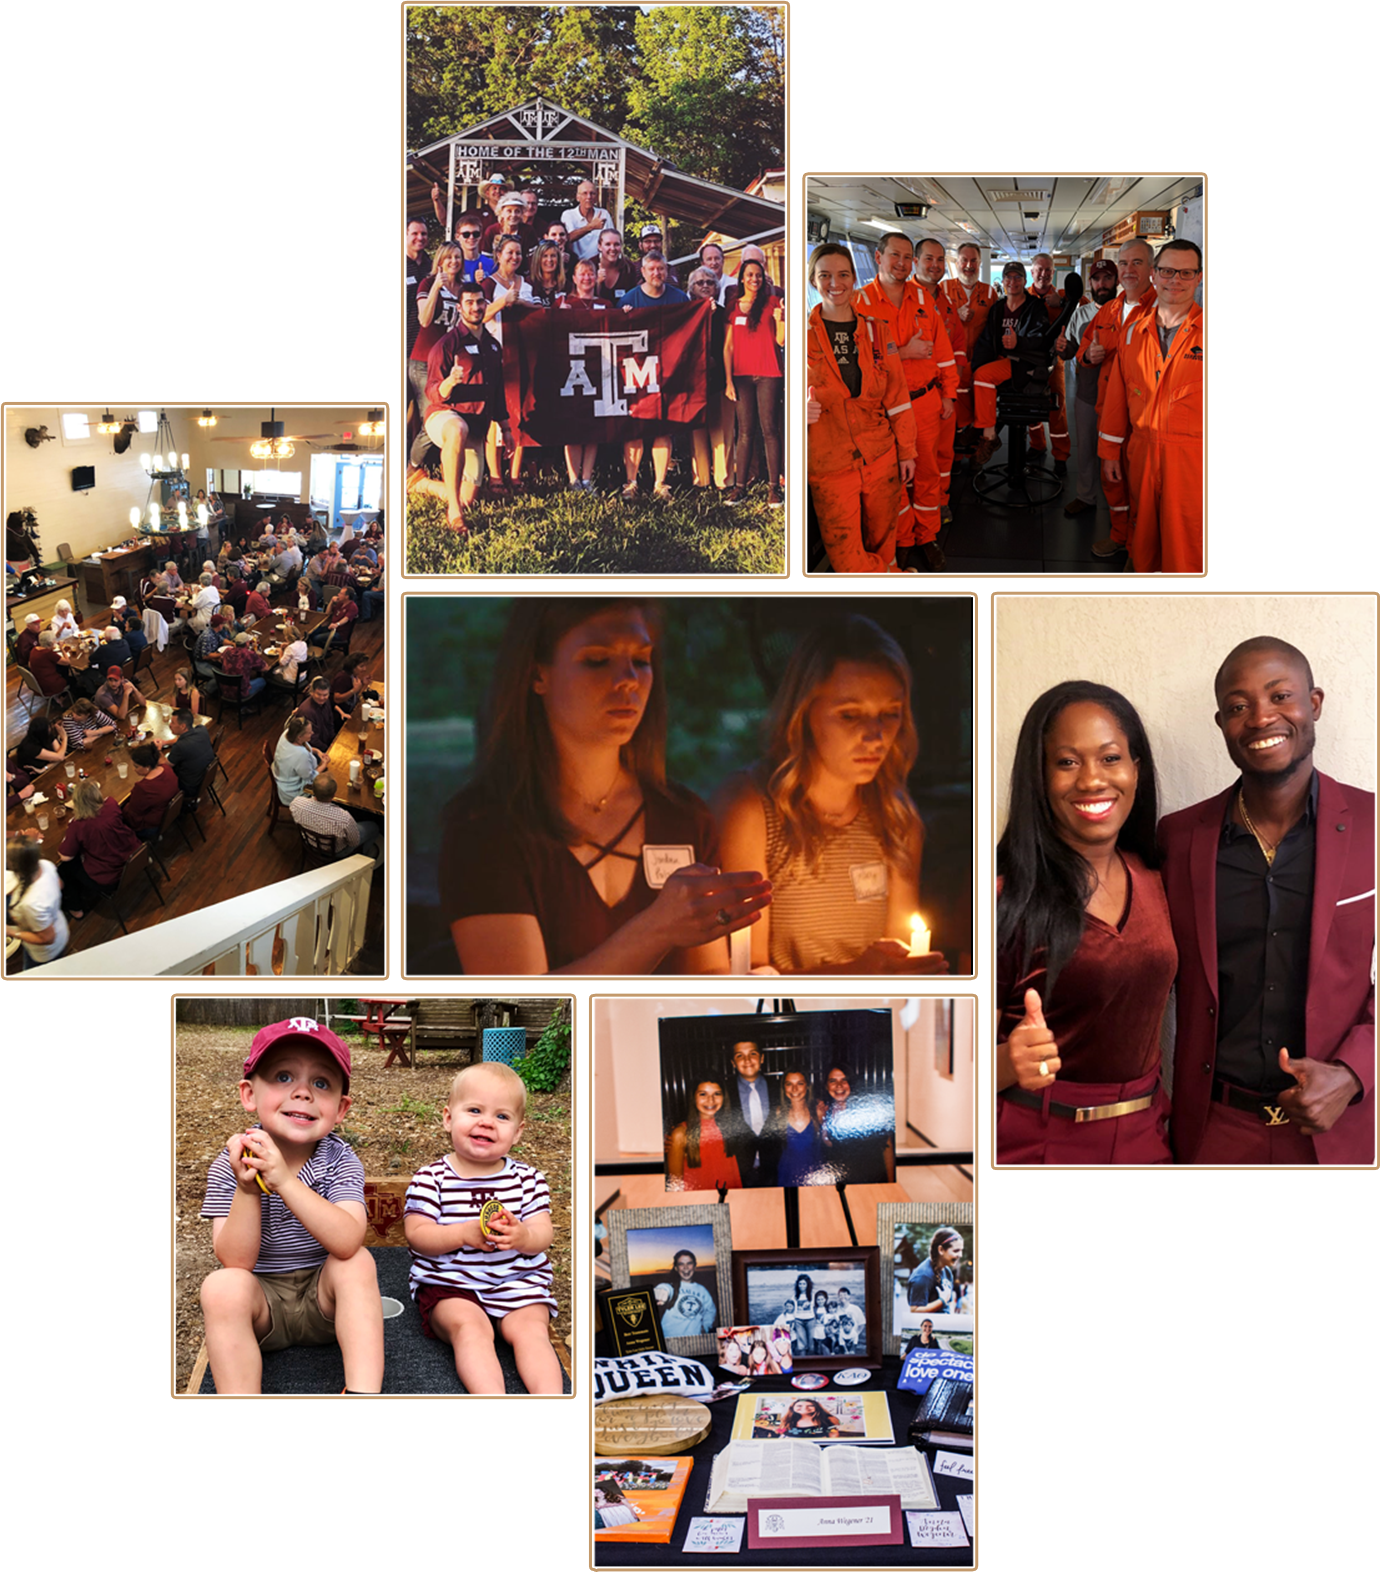 A collage of photos showing scenes from Muster celebrations around the world.